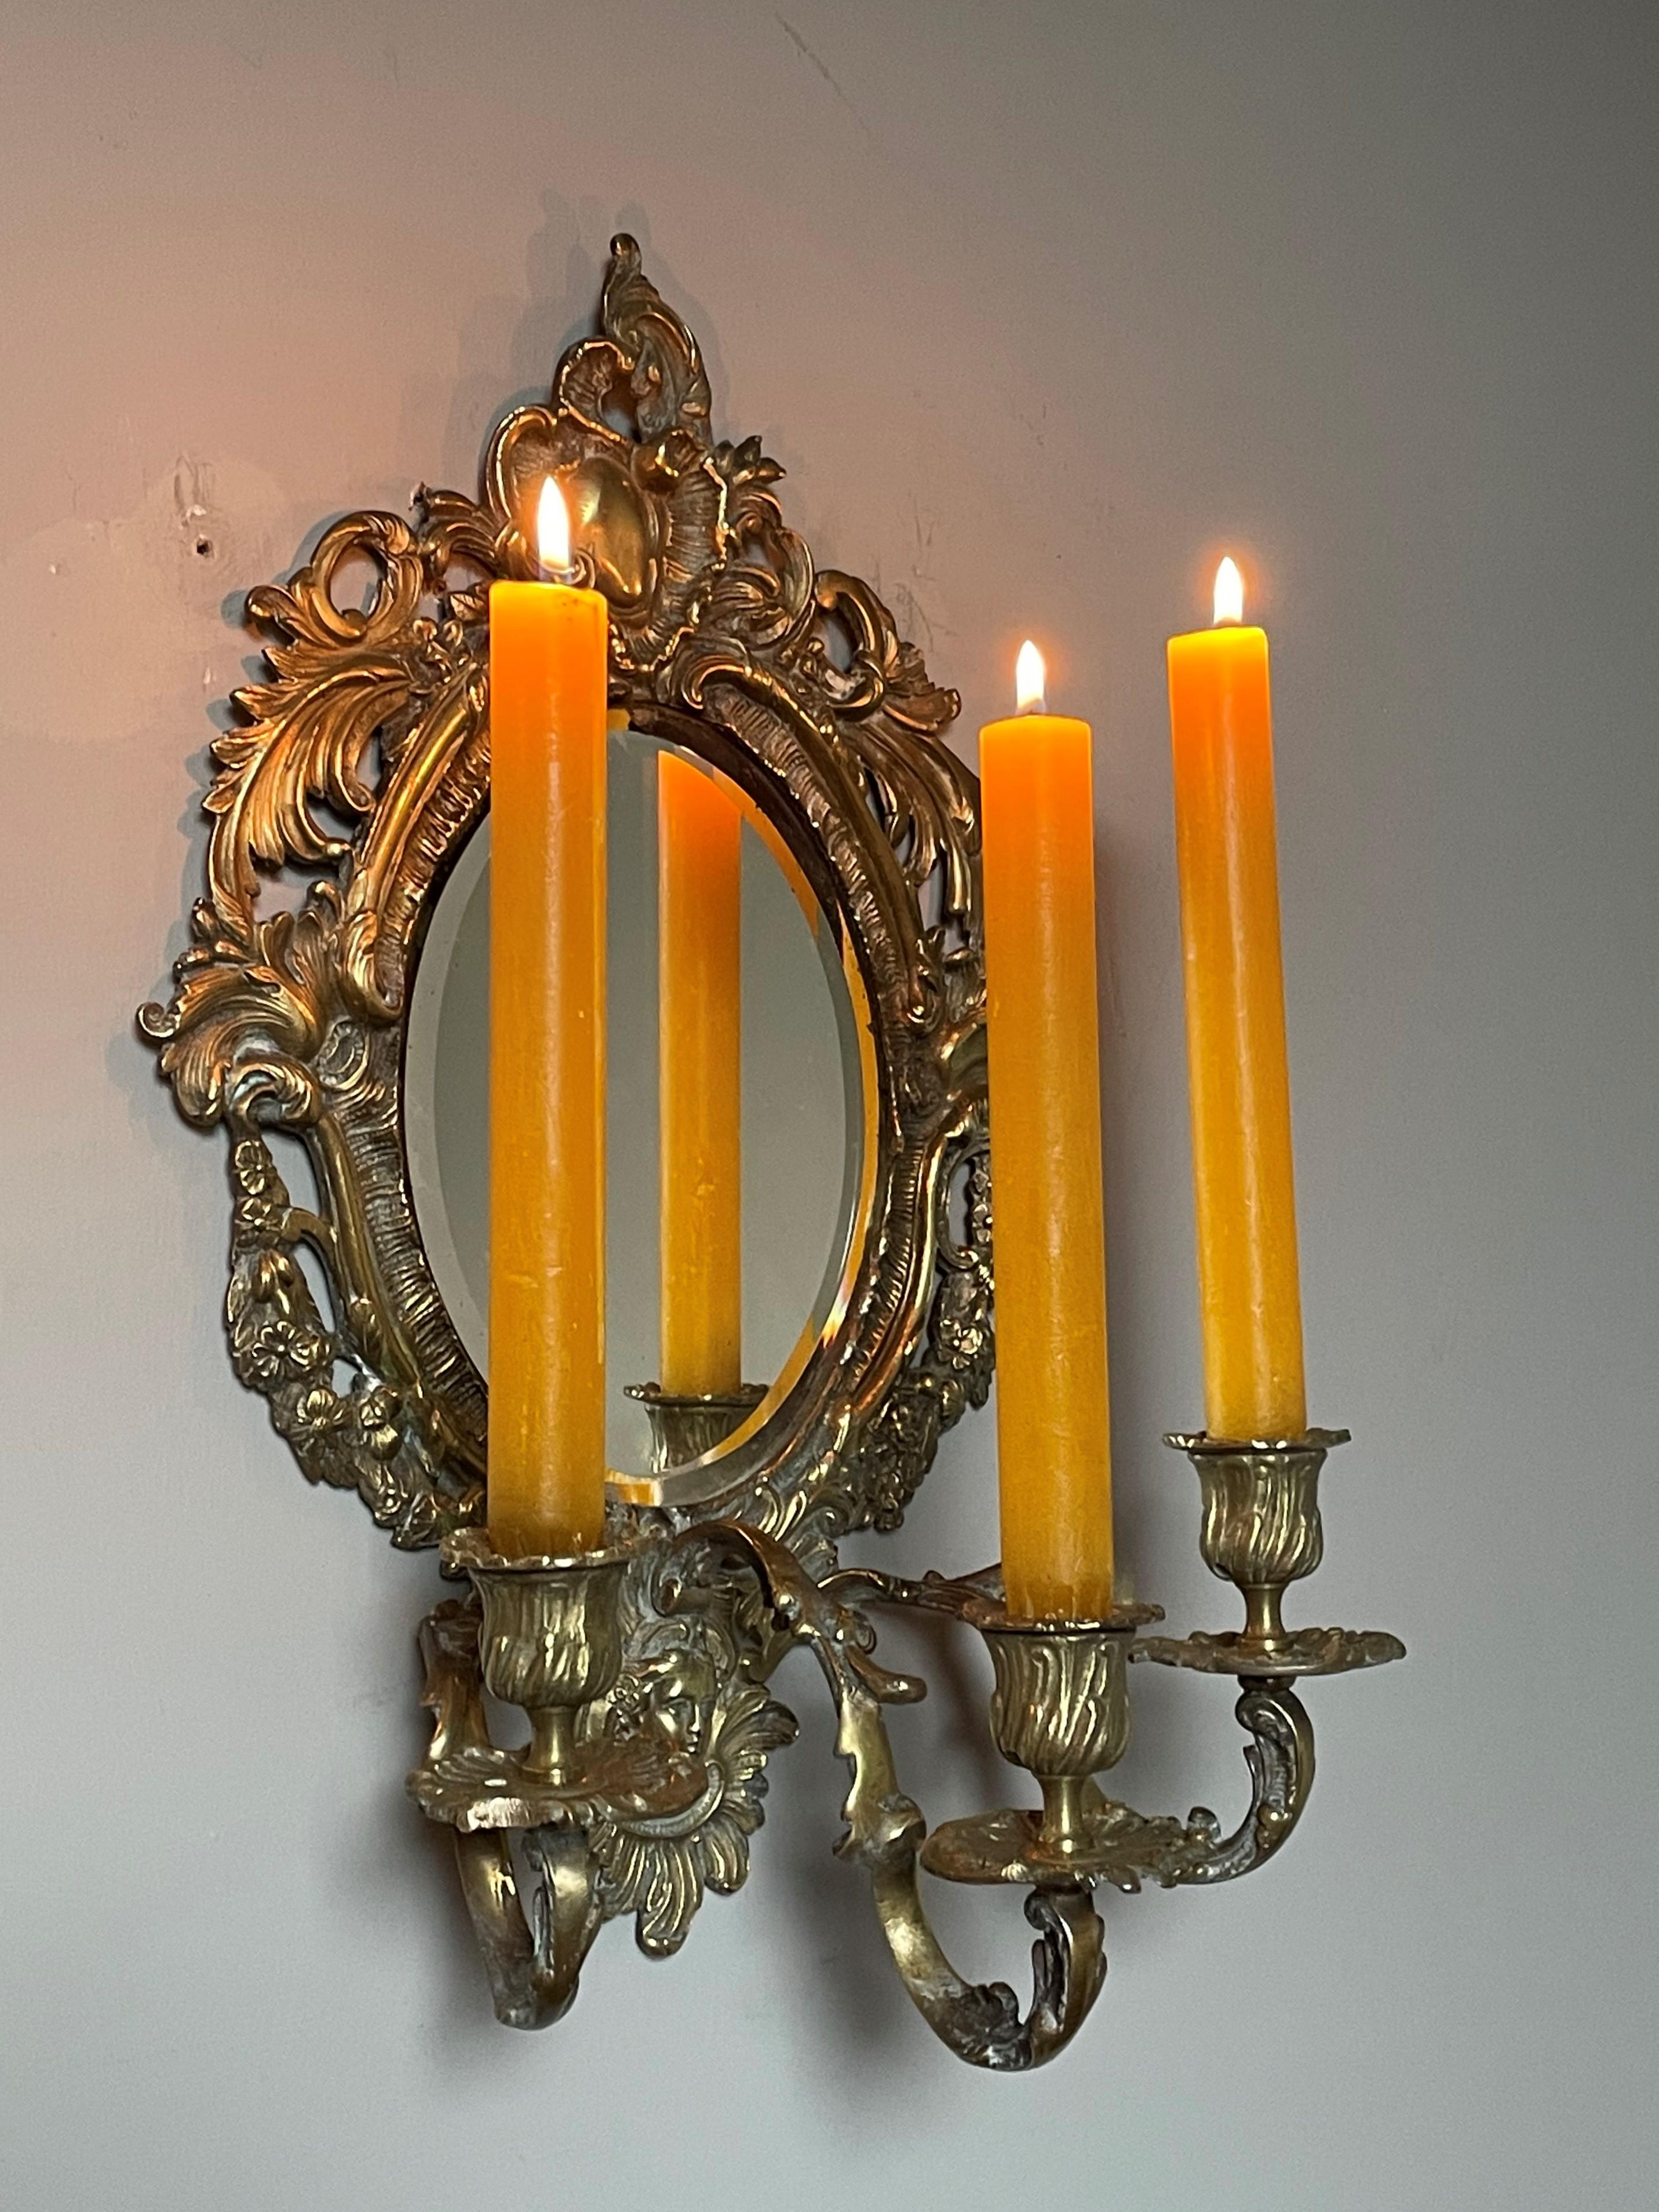 Antique Pair of Bronze Wall Sconce Candelabras w. Beveled Mirrors & Goddess Mask For Sale 7